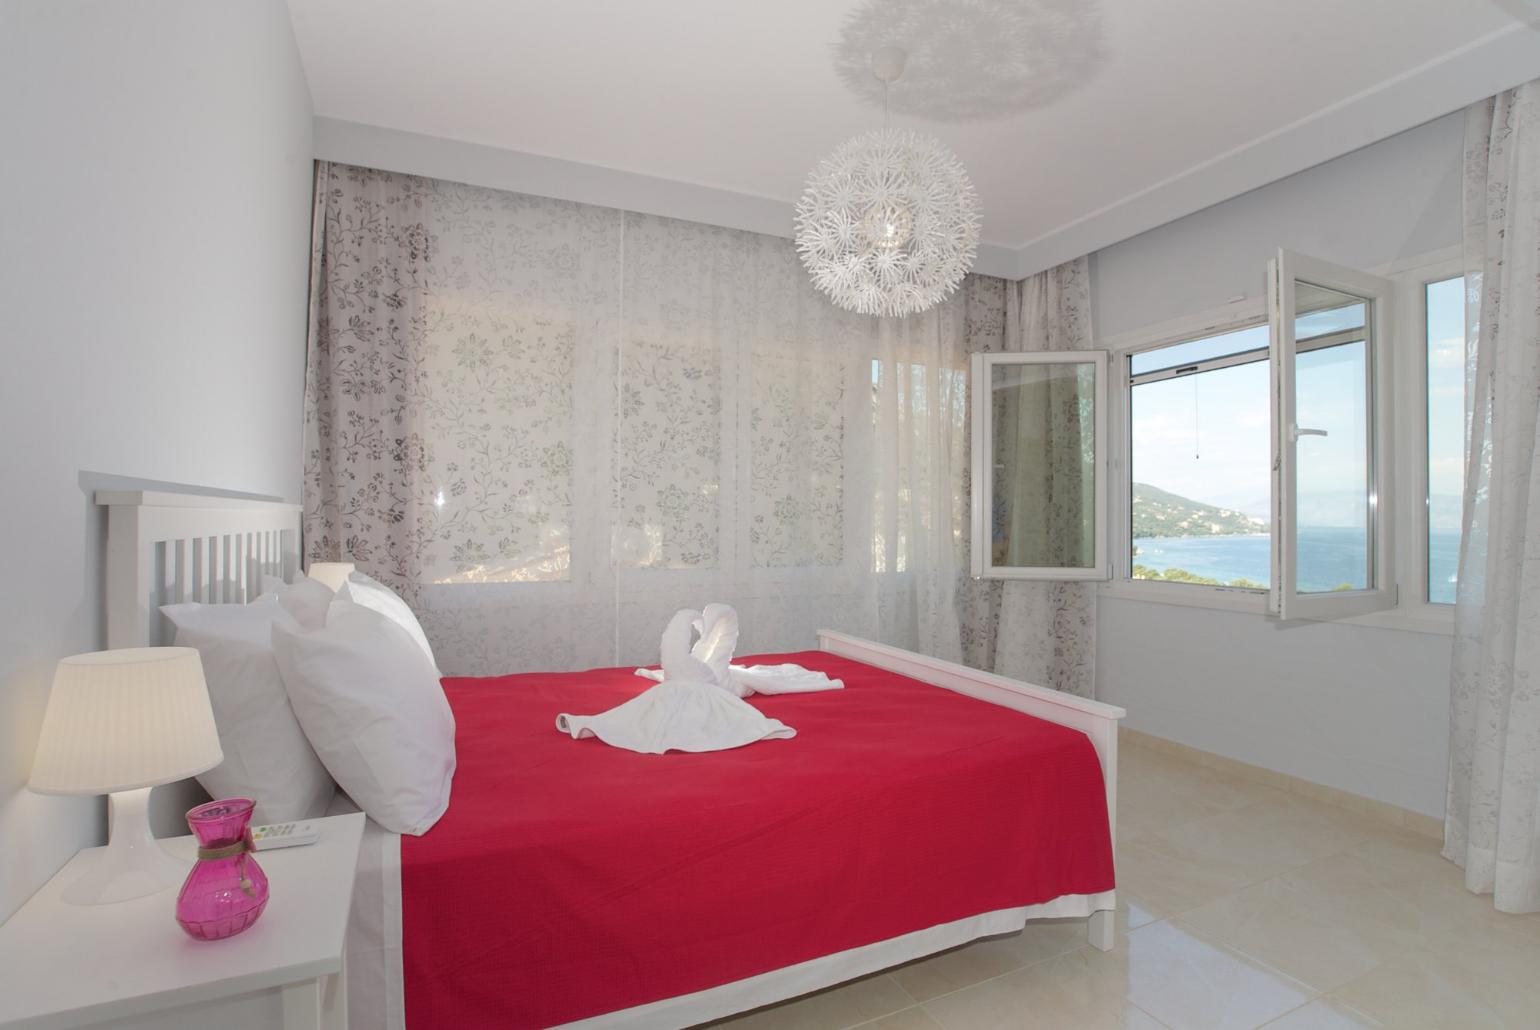 Double bedroom with en suite bathroom, A/C, living area, and balcony access with panoramic sea views